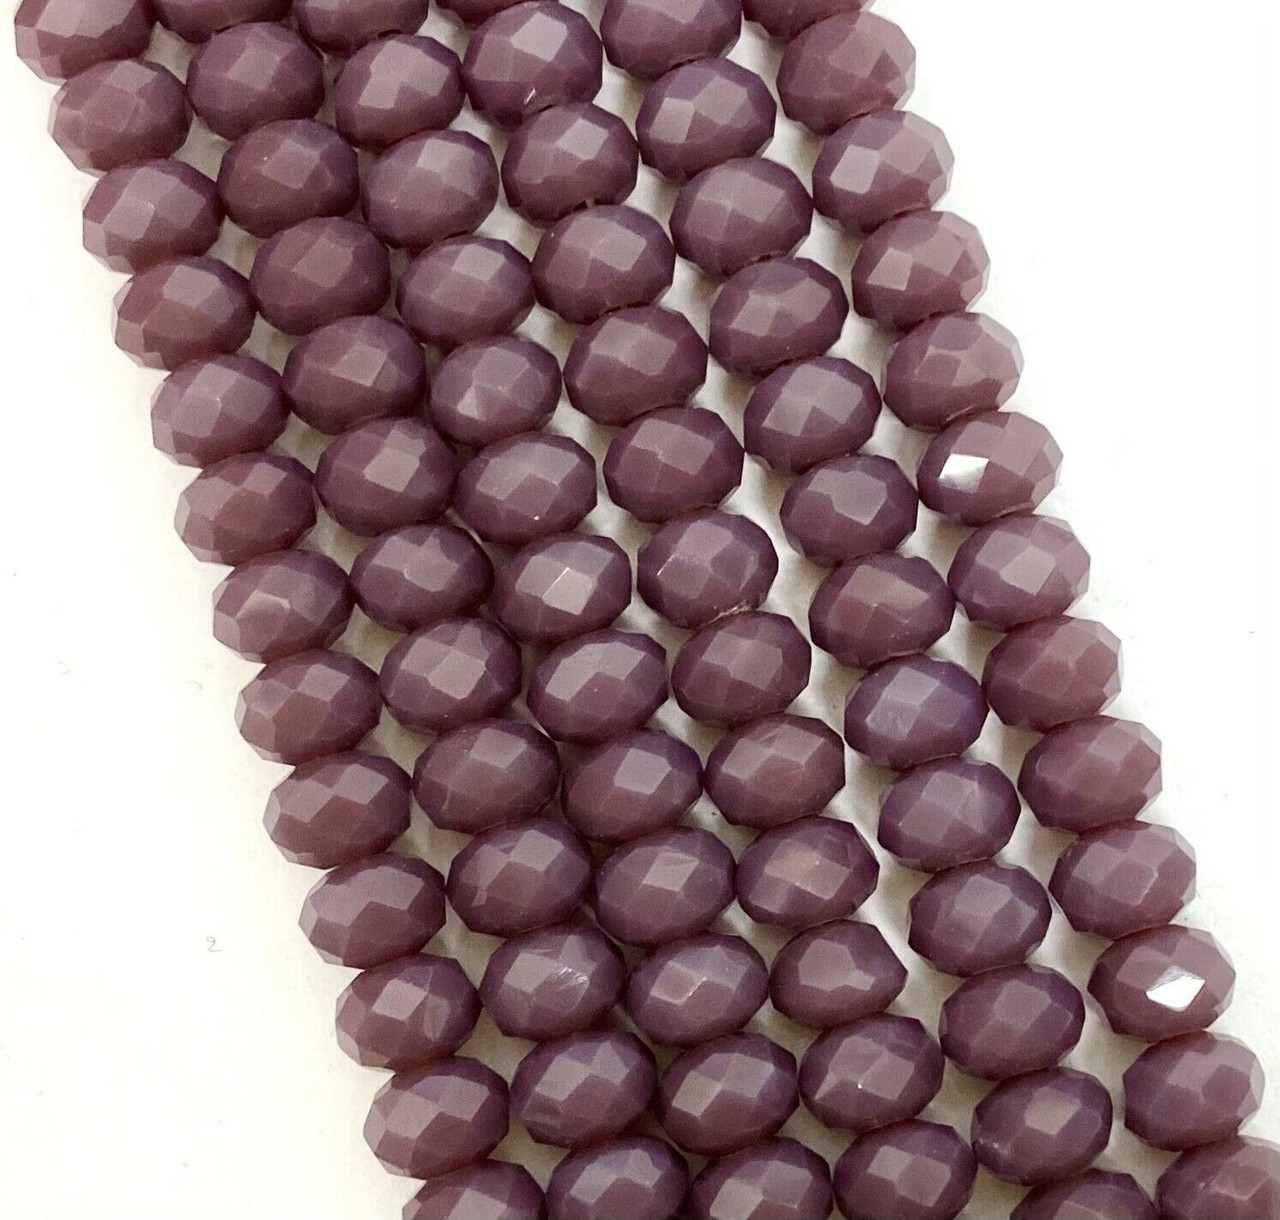 8x6mm Faceted Glass Rondelles - PURPLE OPAQUE - approx 72 beads